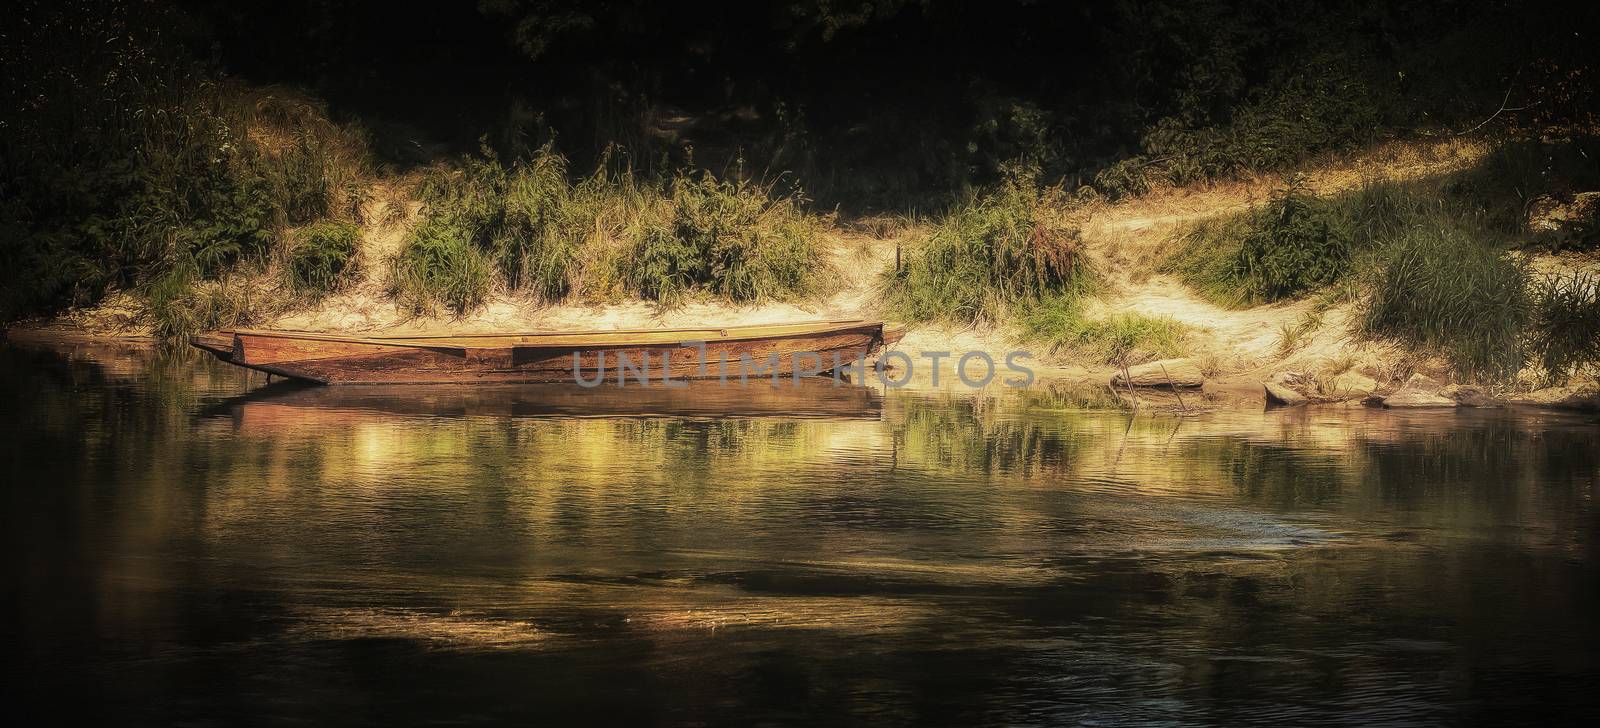 A wooden boat leaving by the river by sandra_fotodesign